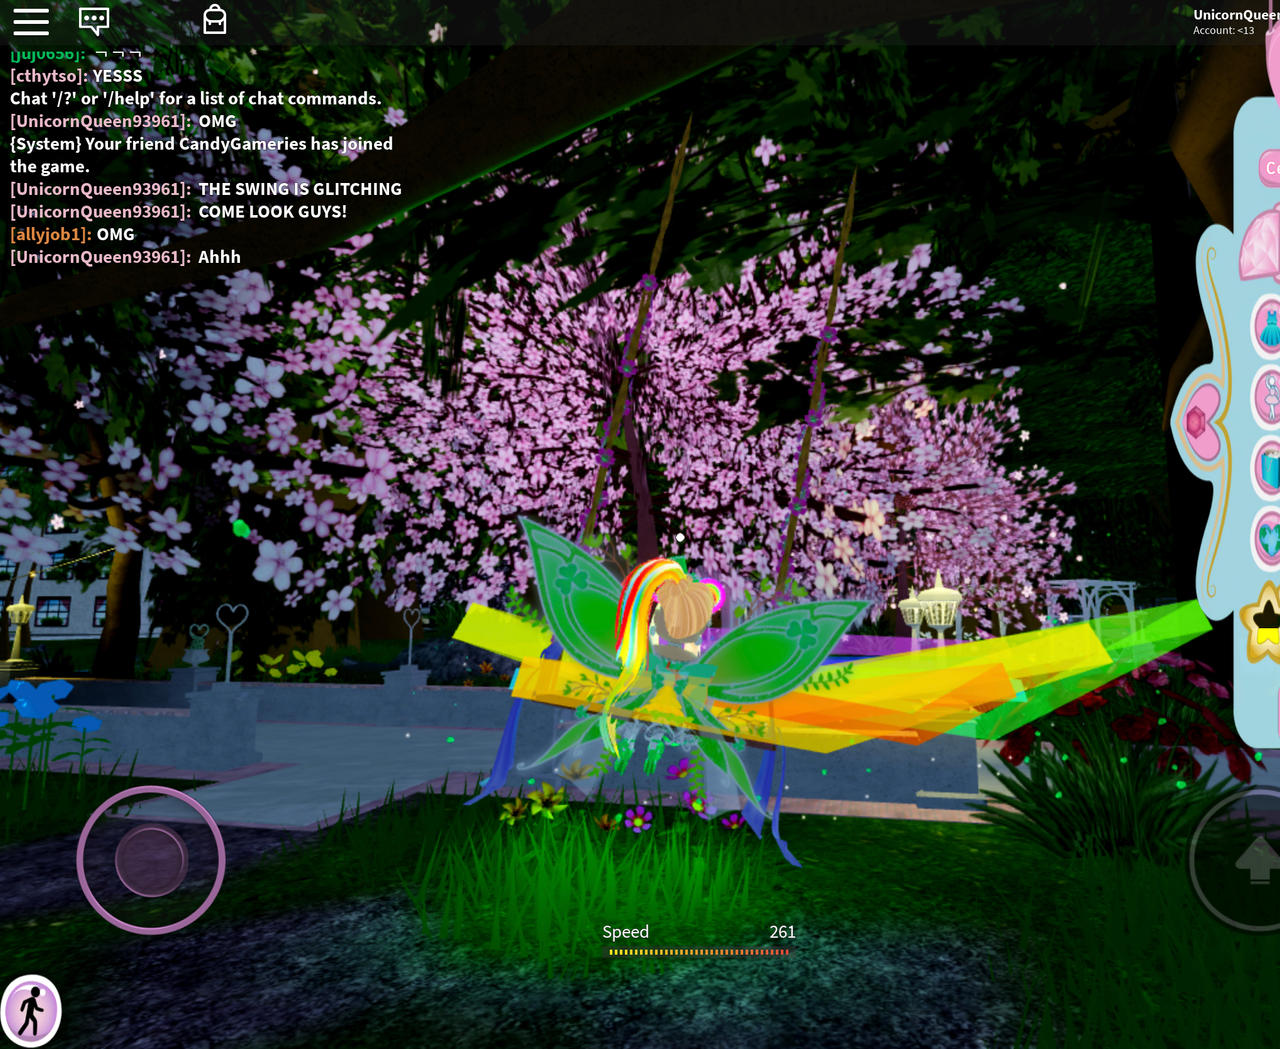 The Divinia Park Swing Glitch By Sophie93961 On Deviantart